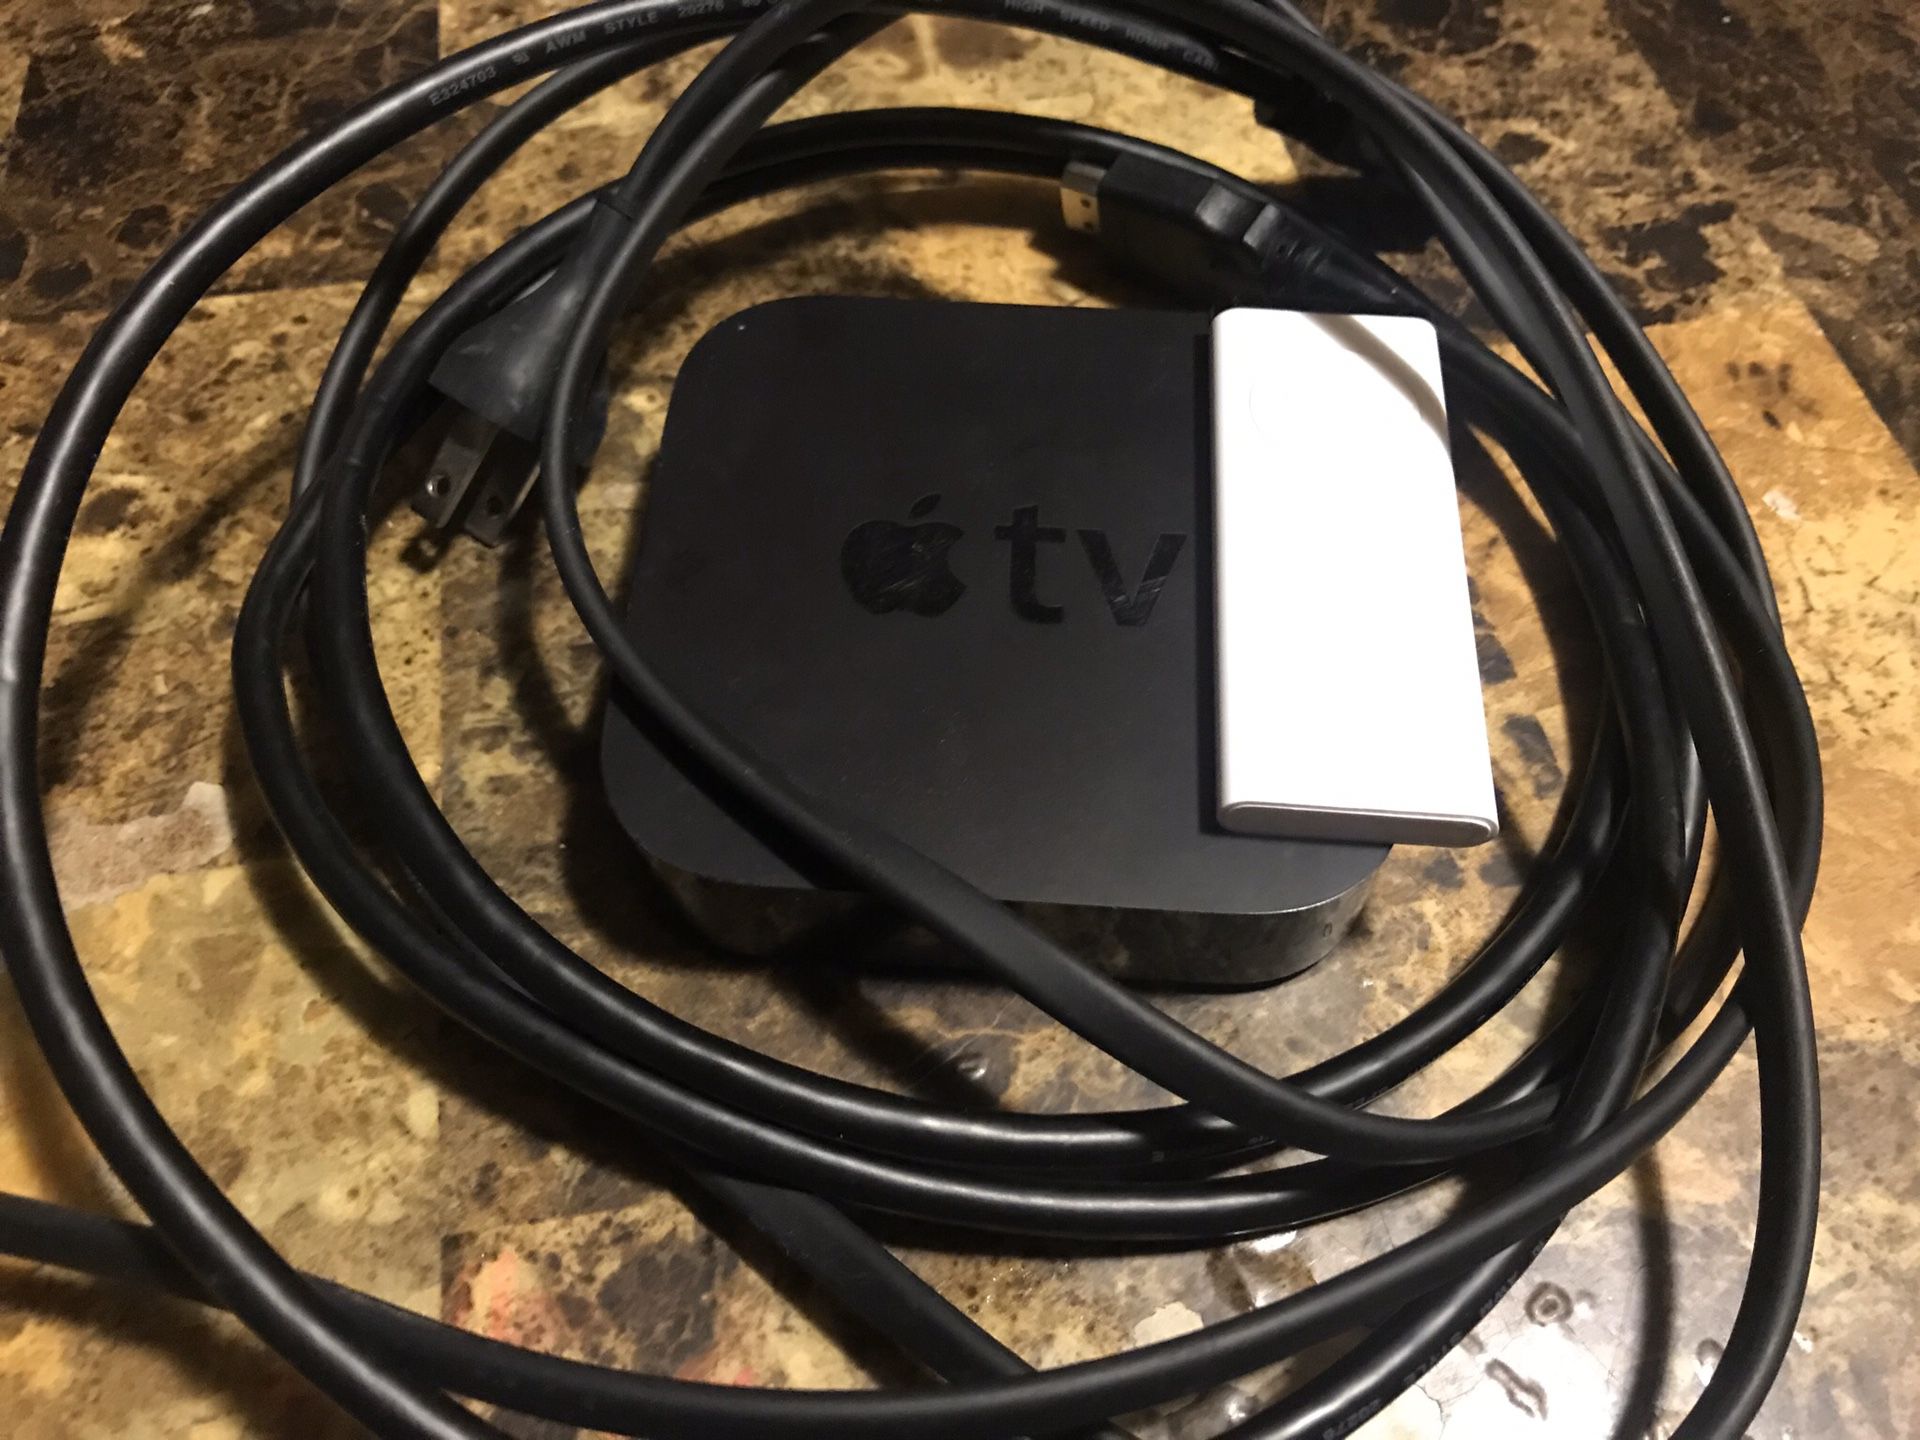 Apple TV A1378 Gen 2 with cables and remote